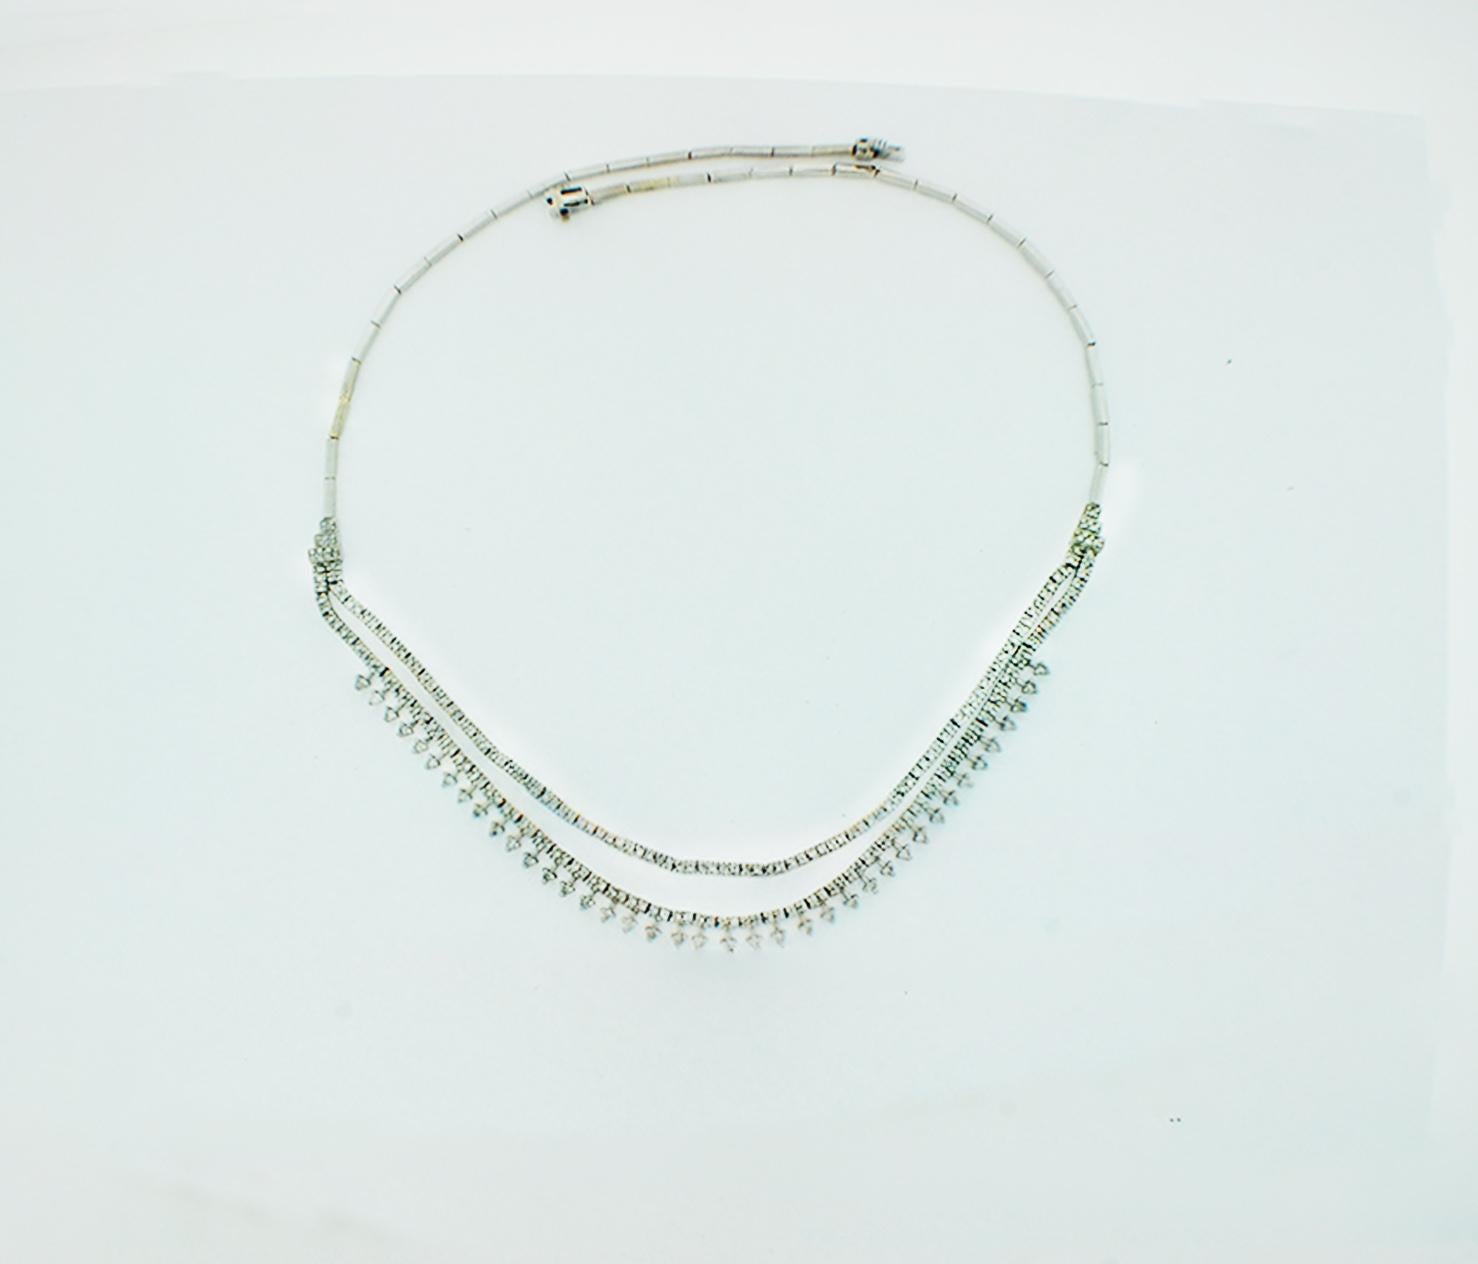 Elegant, 14 karat white gold diamond tennis necklace consists of (39) Round tear-dropped diamonds enhancing double strands of pave set diamonds of nearly 250 stones total.
The double strand graduates at a length of 16